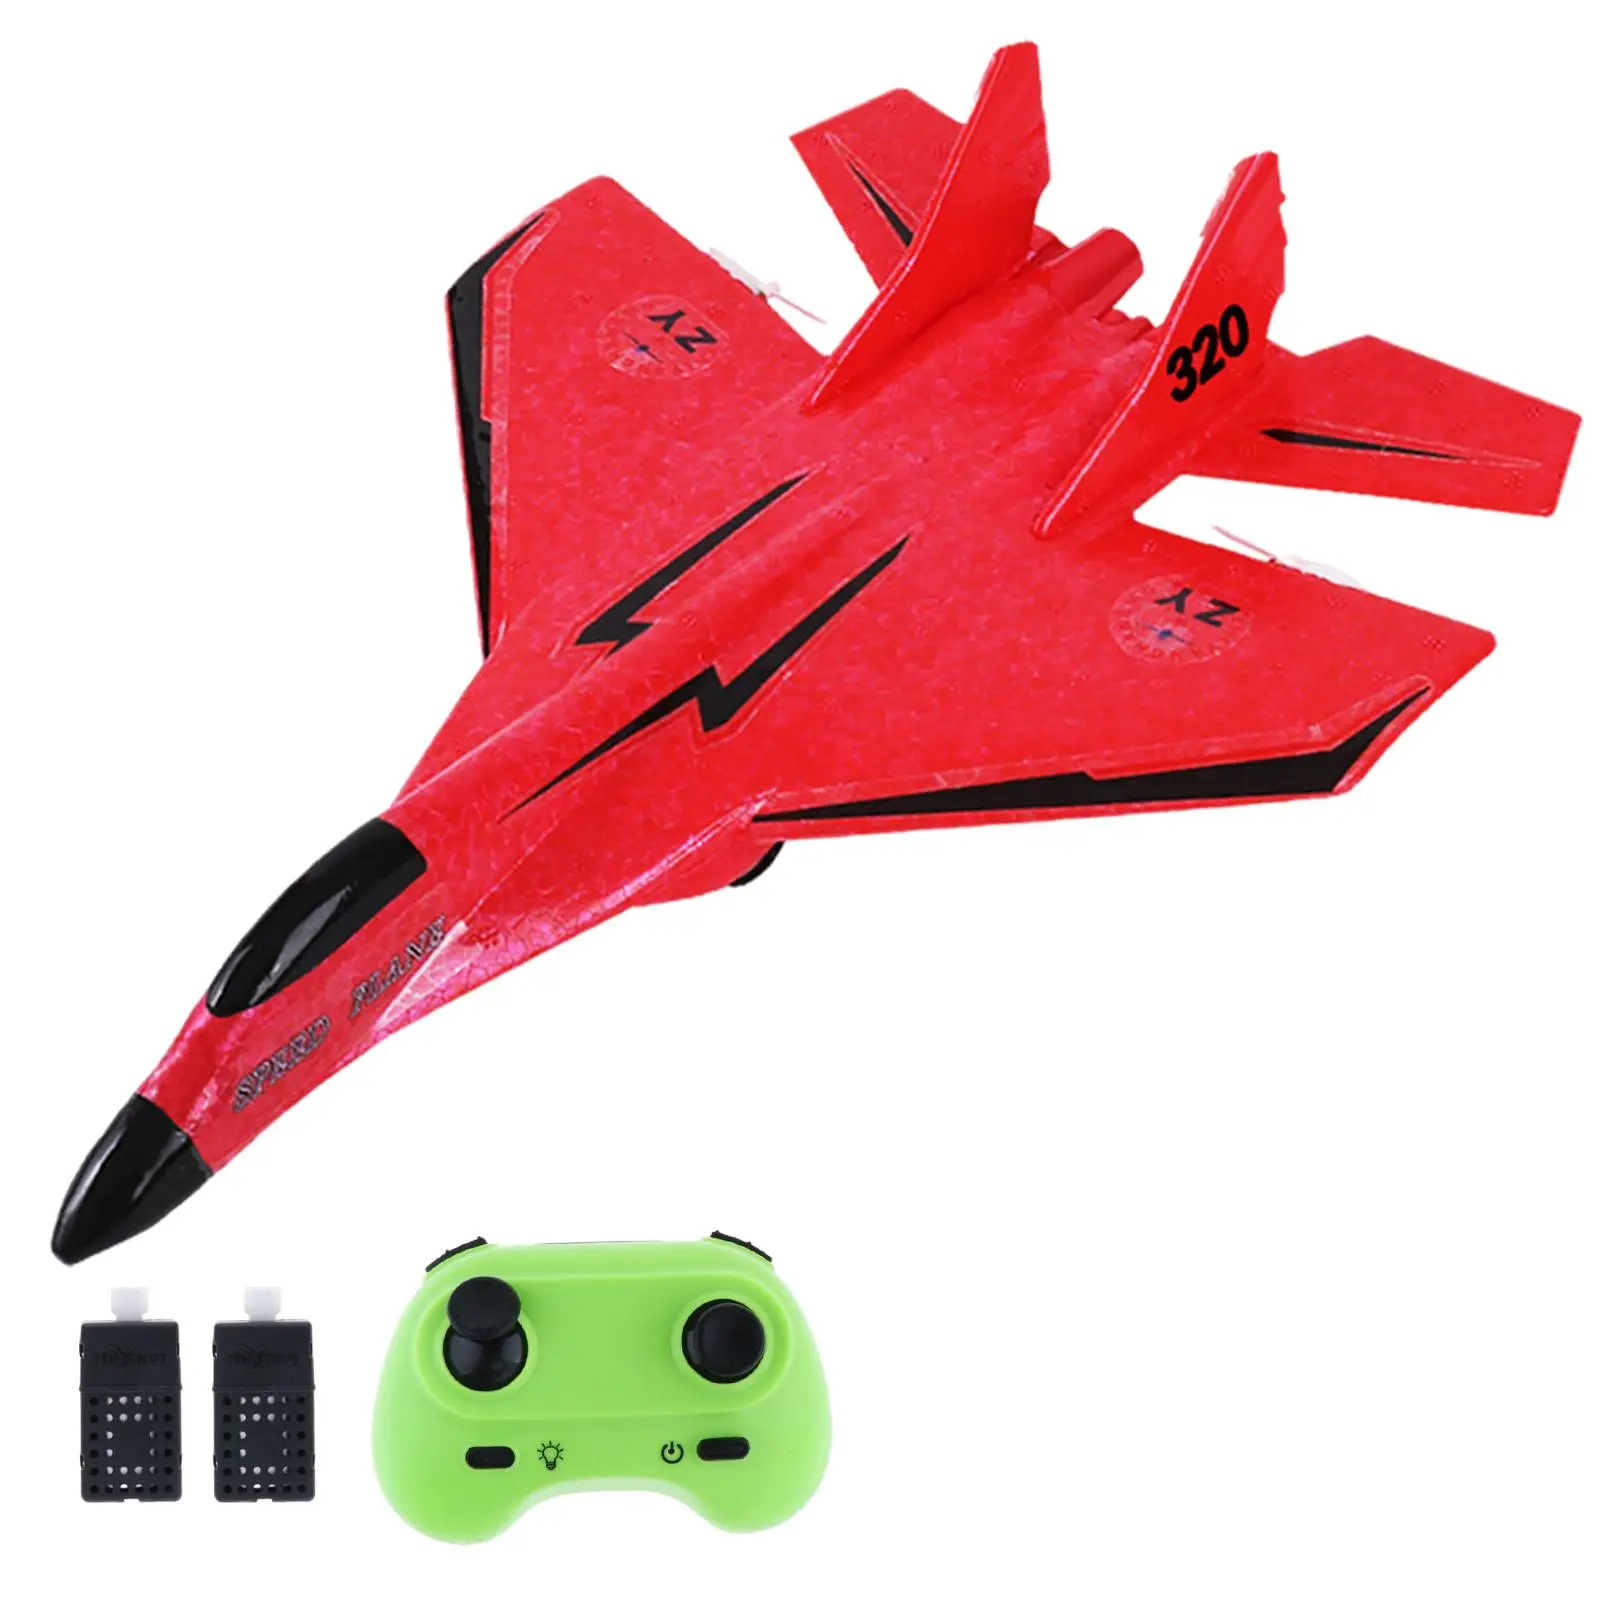 RC Plane to Control 2.4G Gift with Light RC Aircraft Jet RC Glider Aircraft for Beginner Boys Girls Adults